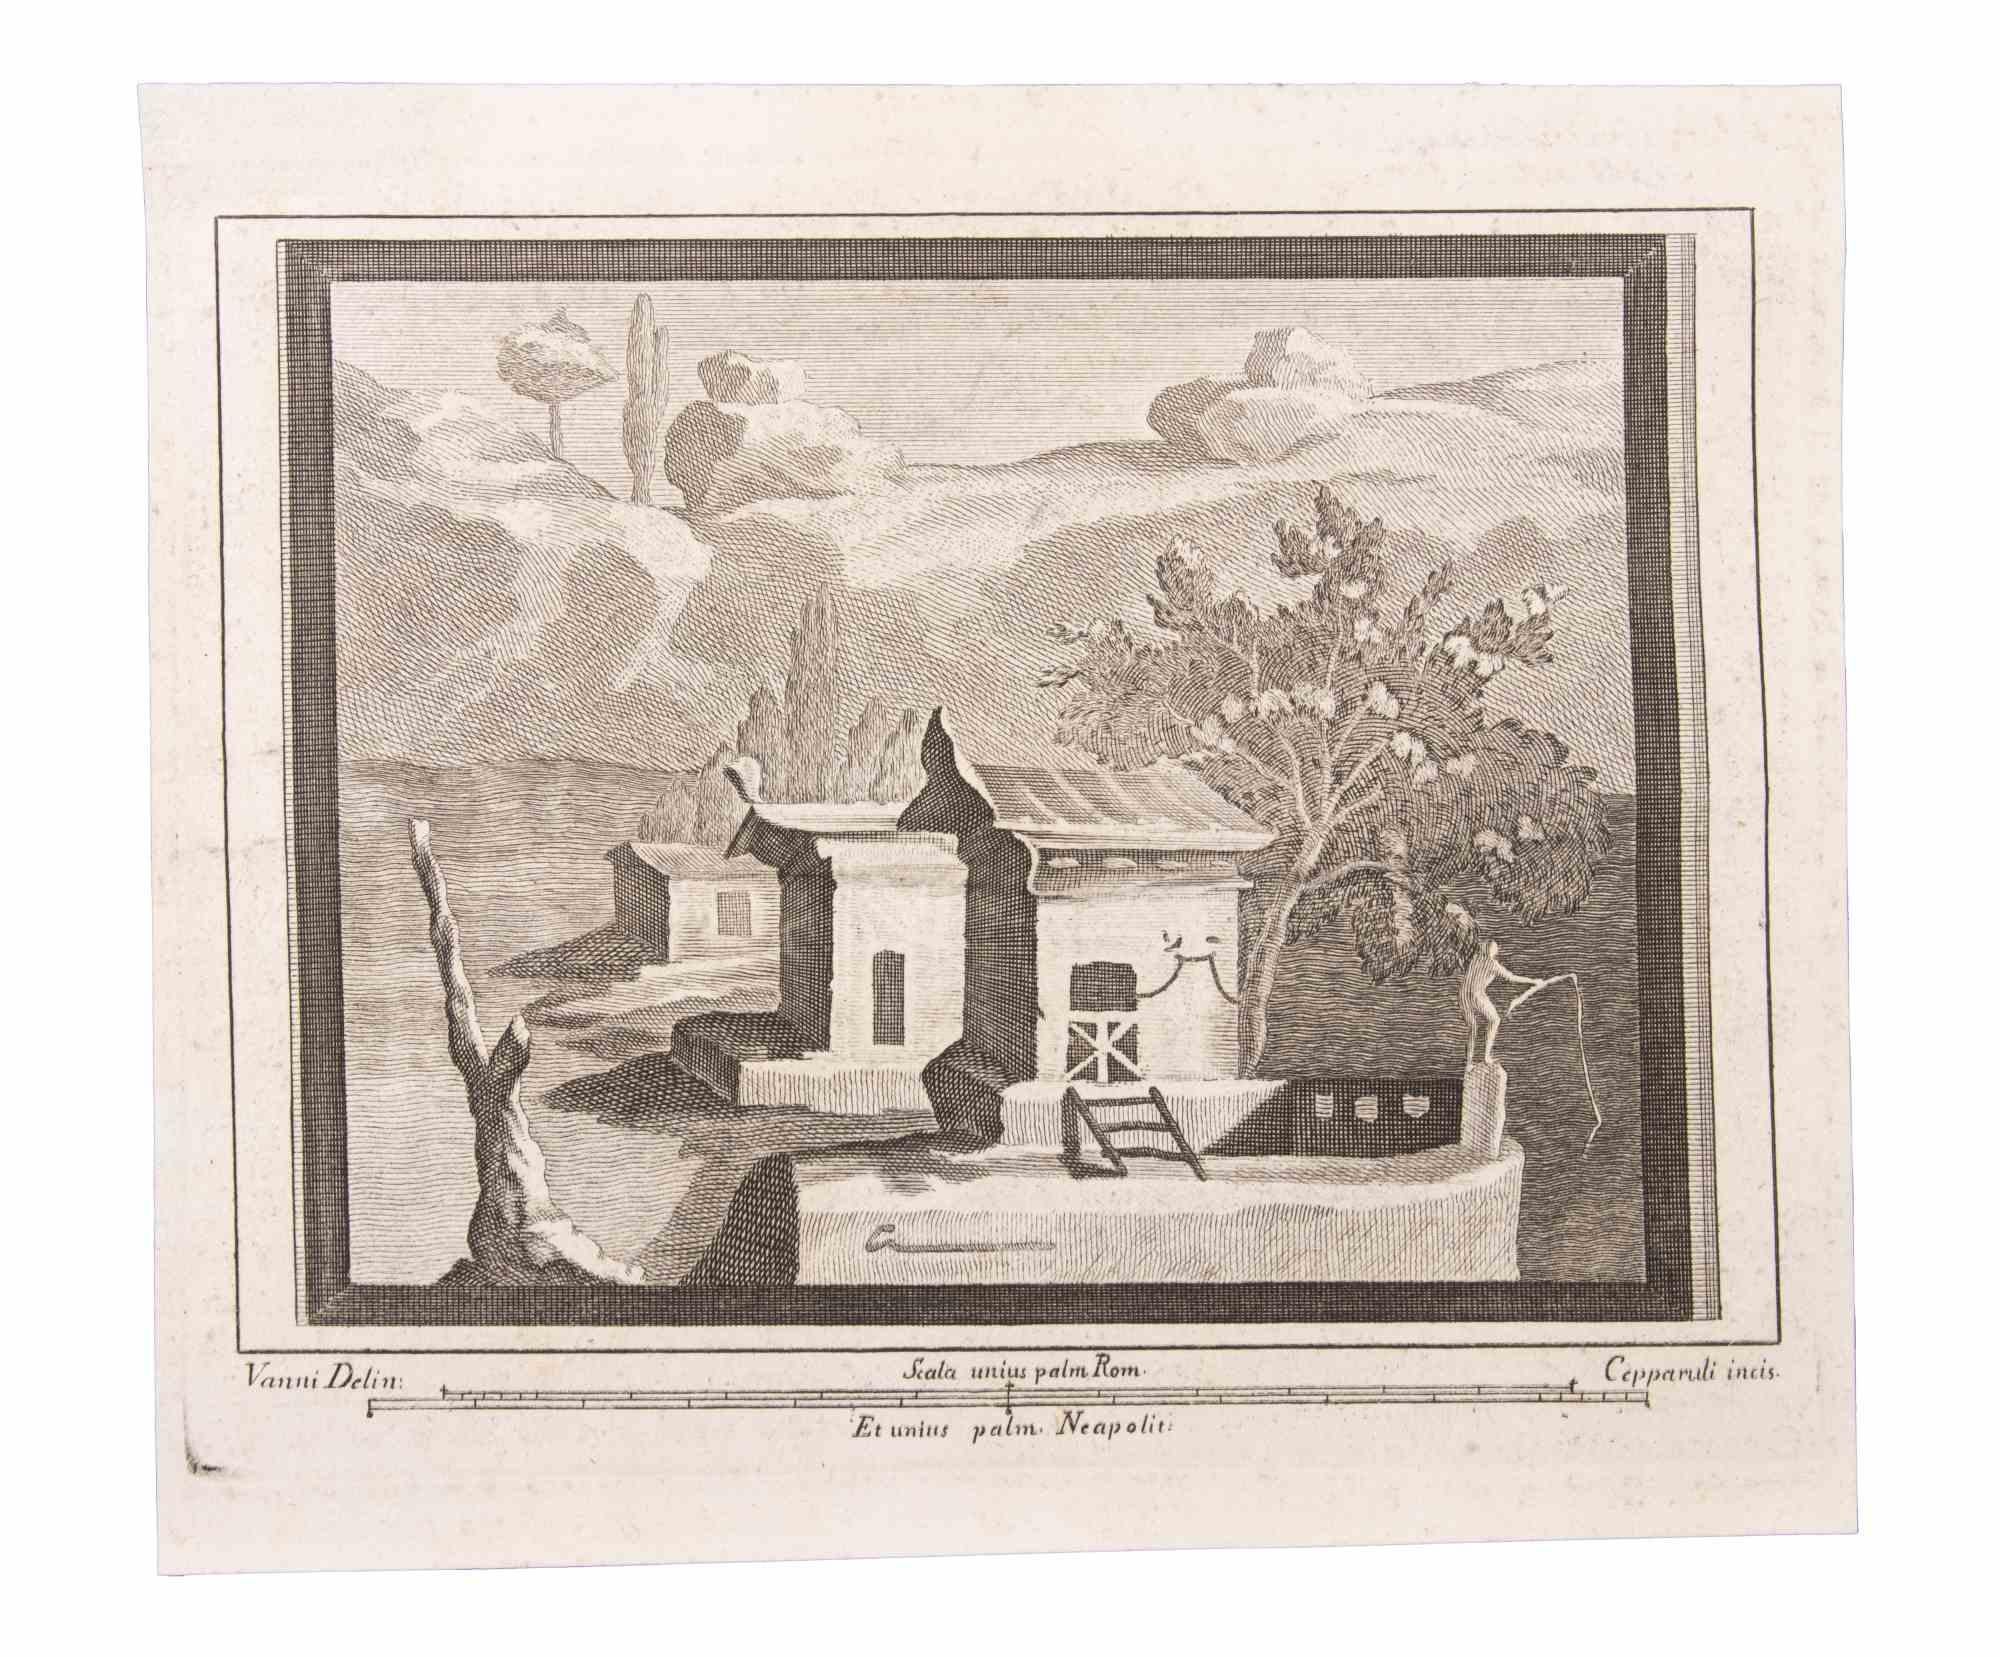 Seascape With Monuments  is an Etching realized by Francesco Cepparuli (1750-1767).

The etching belongs to the print suite “Antiquities of Herculaneum Exposed” (original title: “Le Antichità di Ercolano Esposte”), an eight-volume volume of